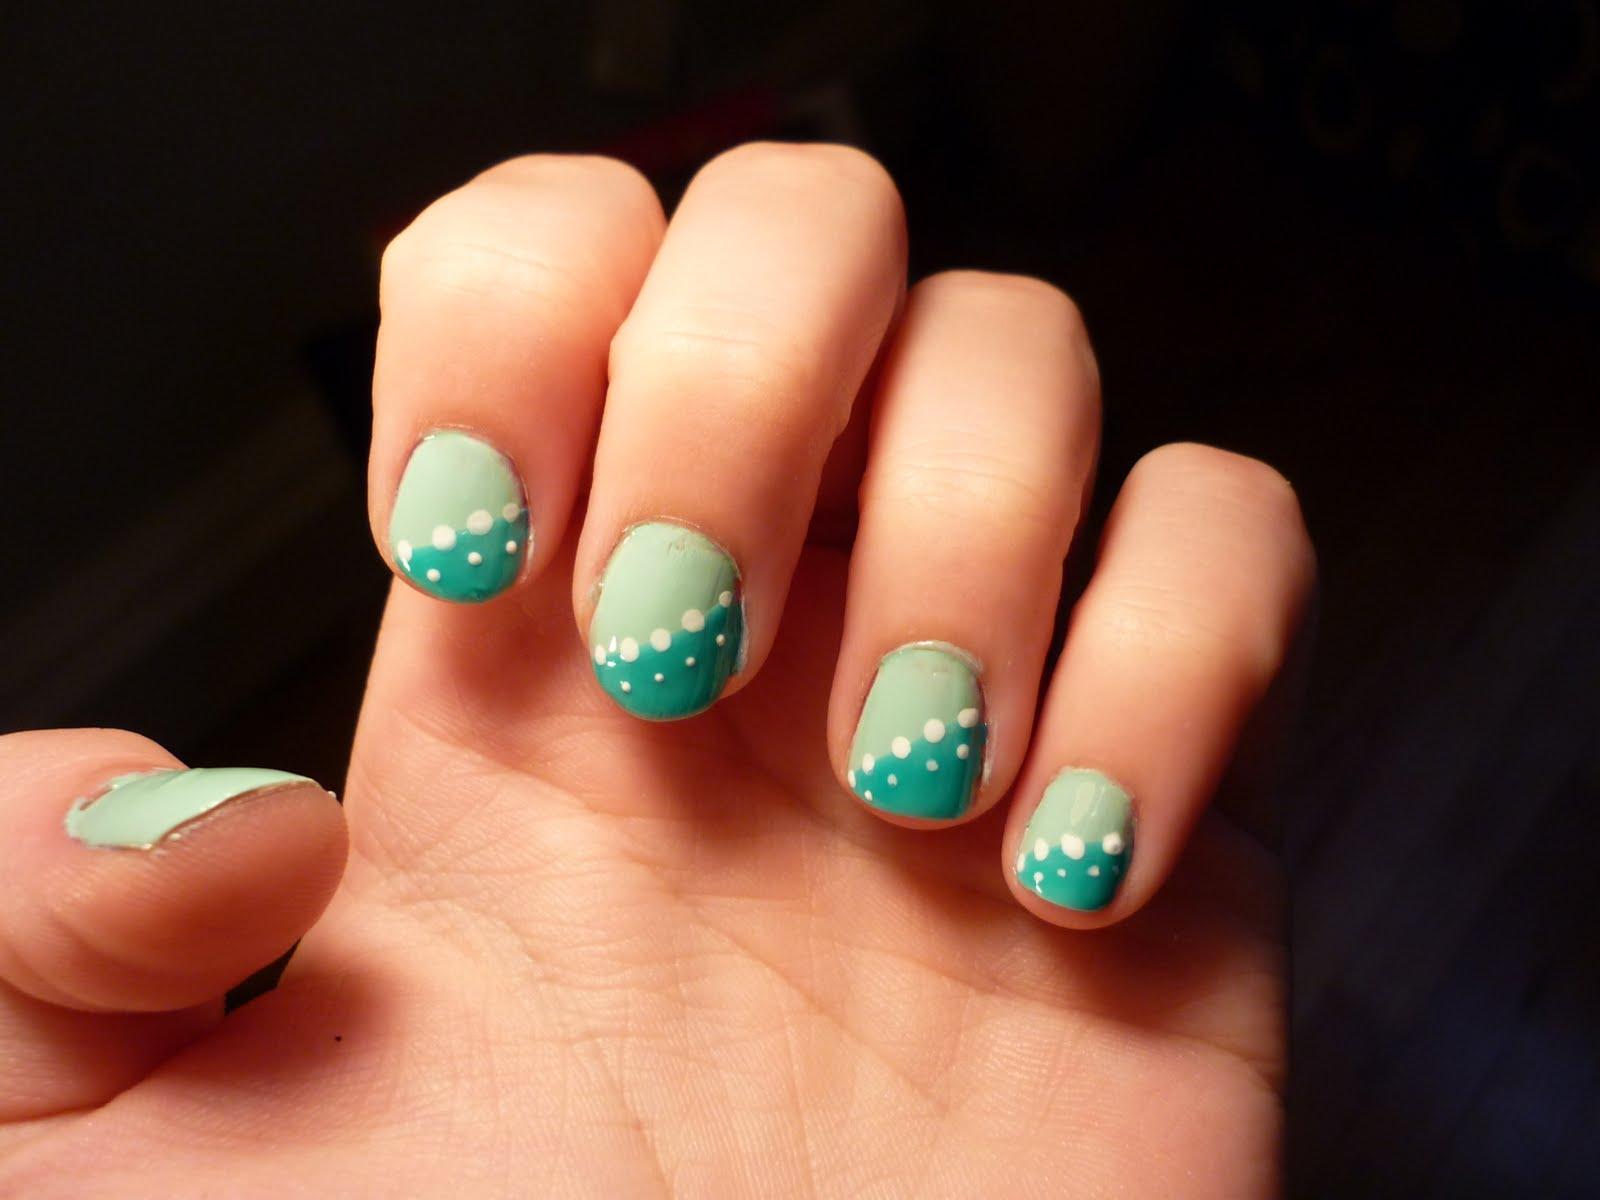 2. Super Cute Nail Art Ideas to Try - wide 3